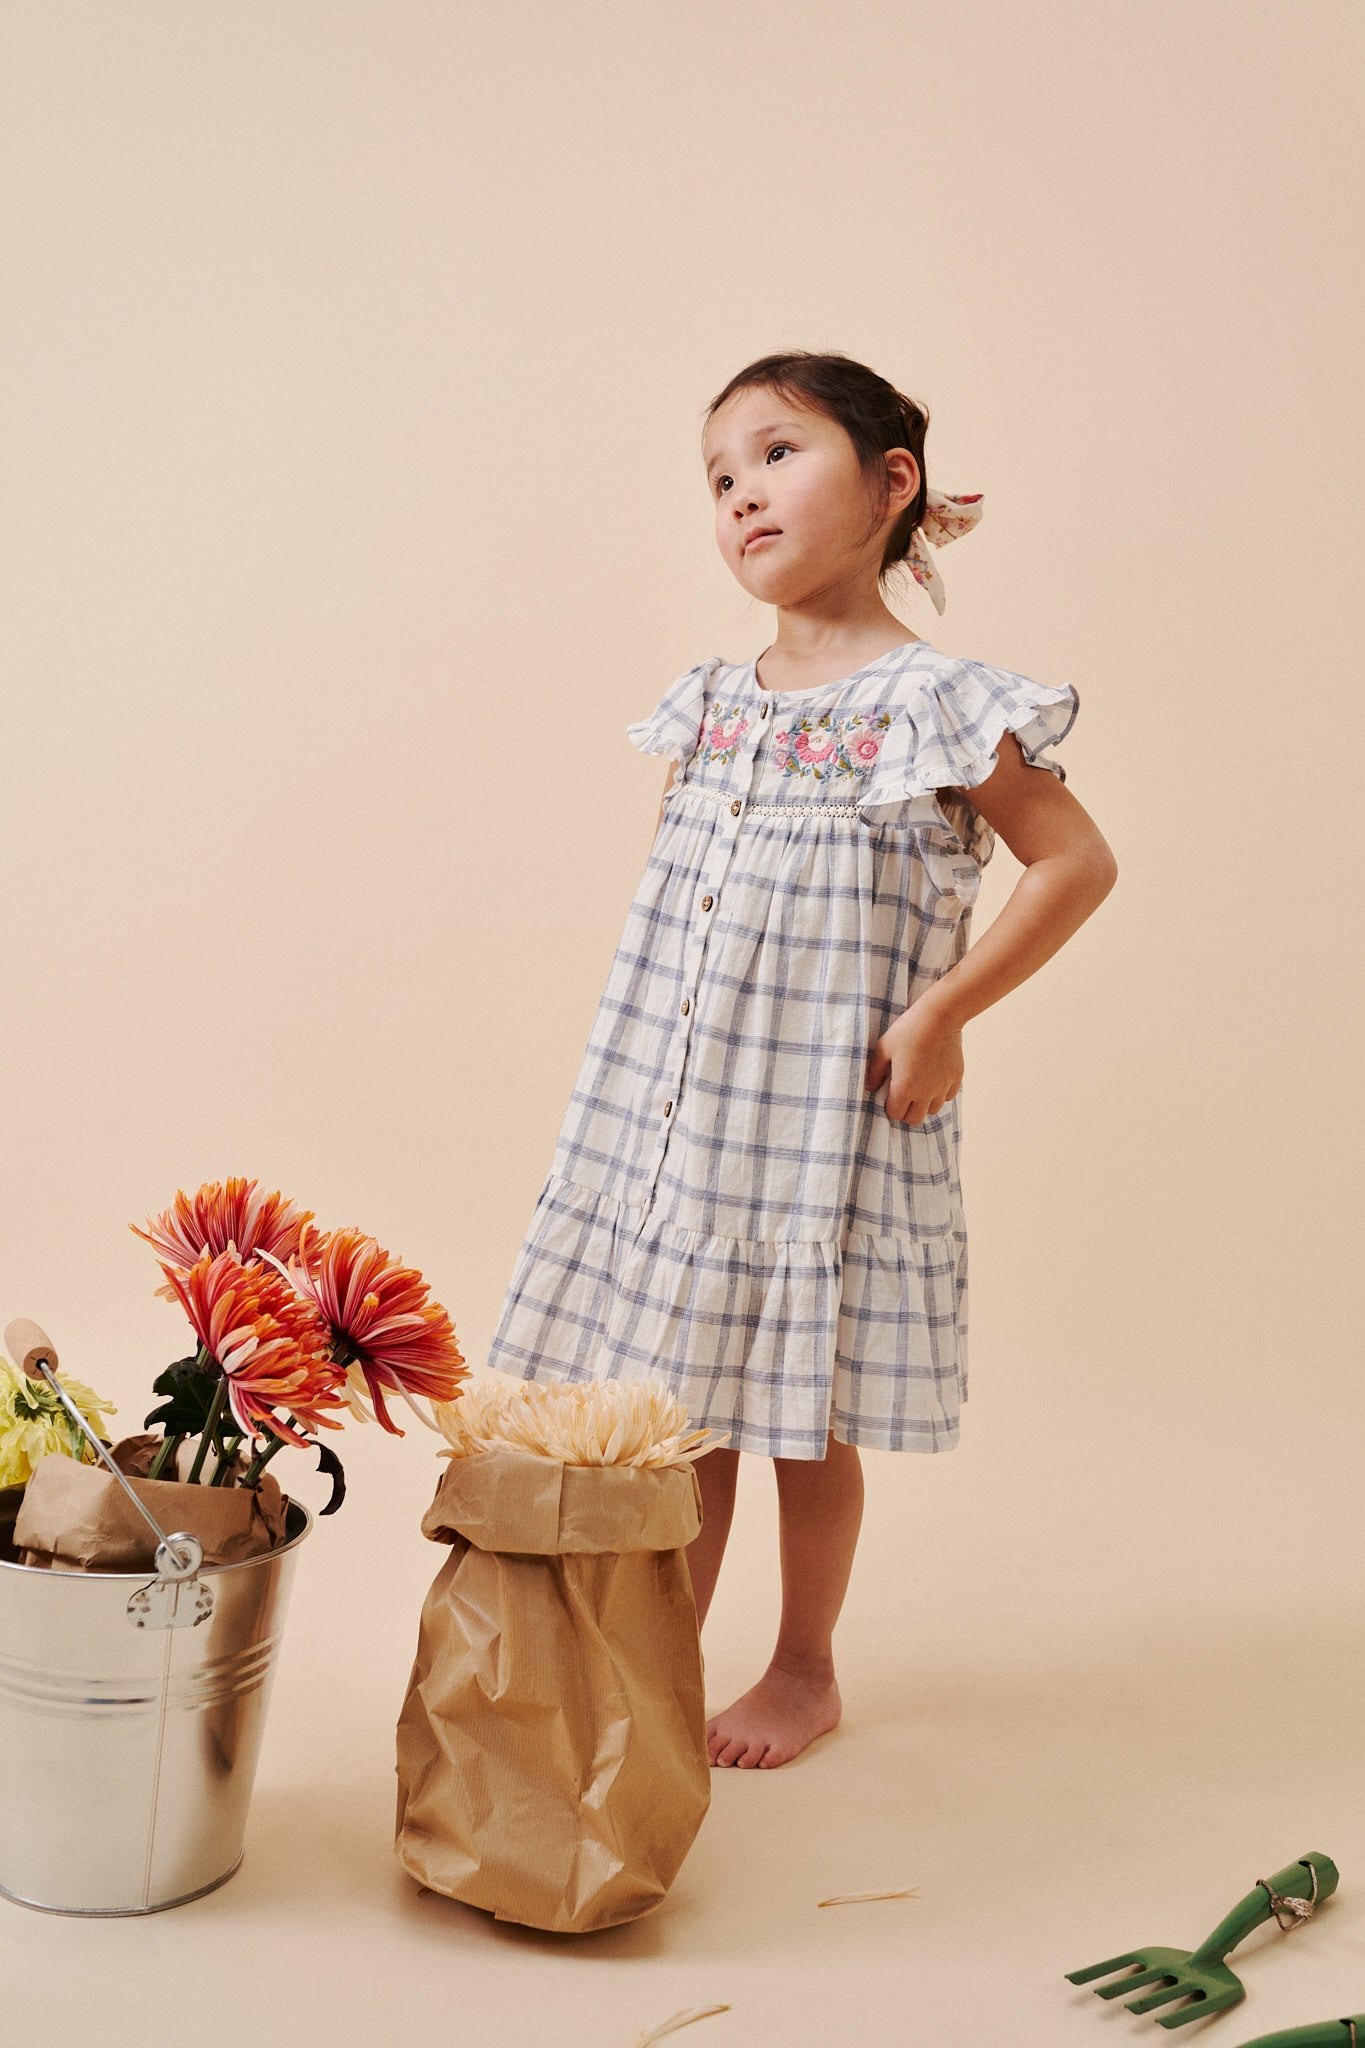 The most stunning girl summer dress - Caroline, with its blue river checks pattern, adorable ruffled design enhances the simplicity and style of this fabulous girl dress. The girl's summer dress, made from high-quality lightweight organic cotton by Louise Misha. Shop girls summer clothing and summer dresses online.